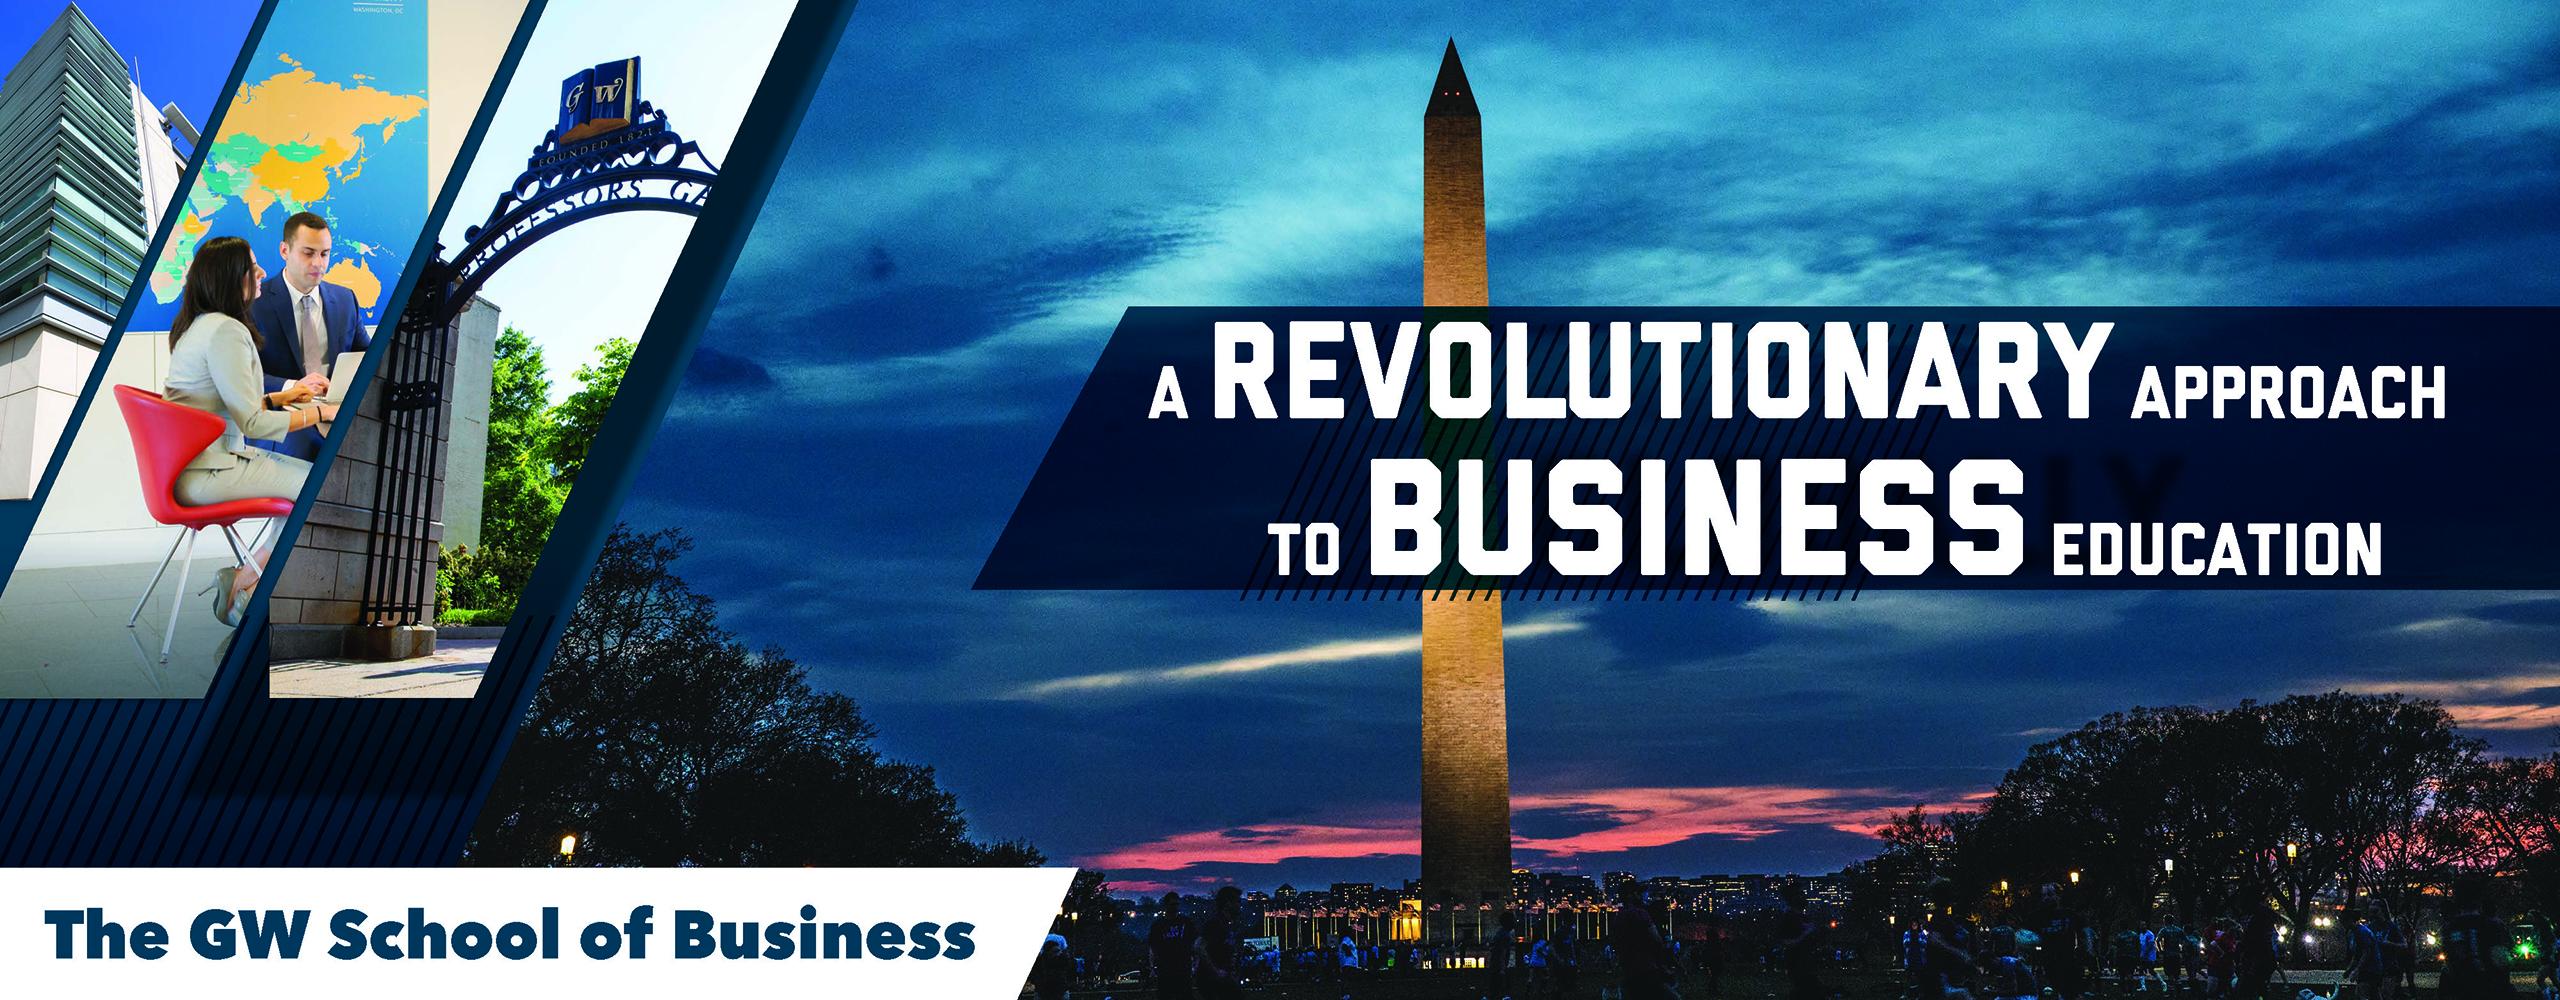 "A Revolutionary Approach to Business Education." Image shows the GW School of Business logo against a backdrop image of the Washington Monument at dusk. A small photo collage on the left features images of Duques Hall, students sitting around a table in Duques Hall, and the Professors Gate in Kogan Plaza.